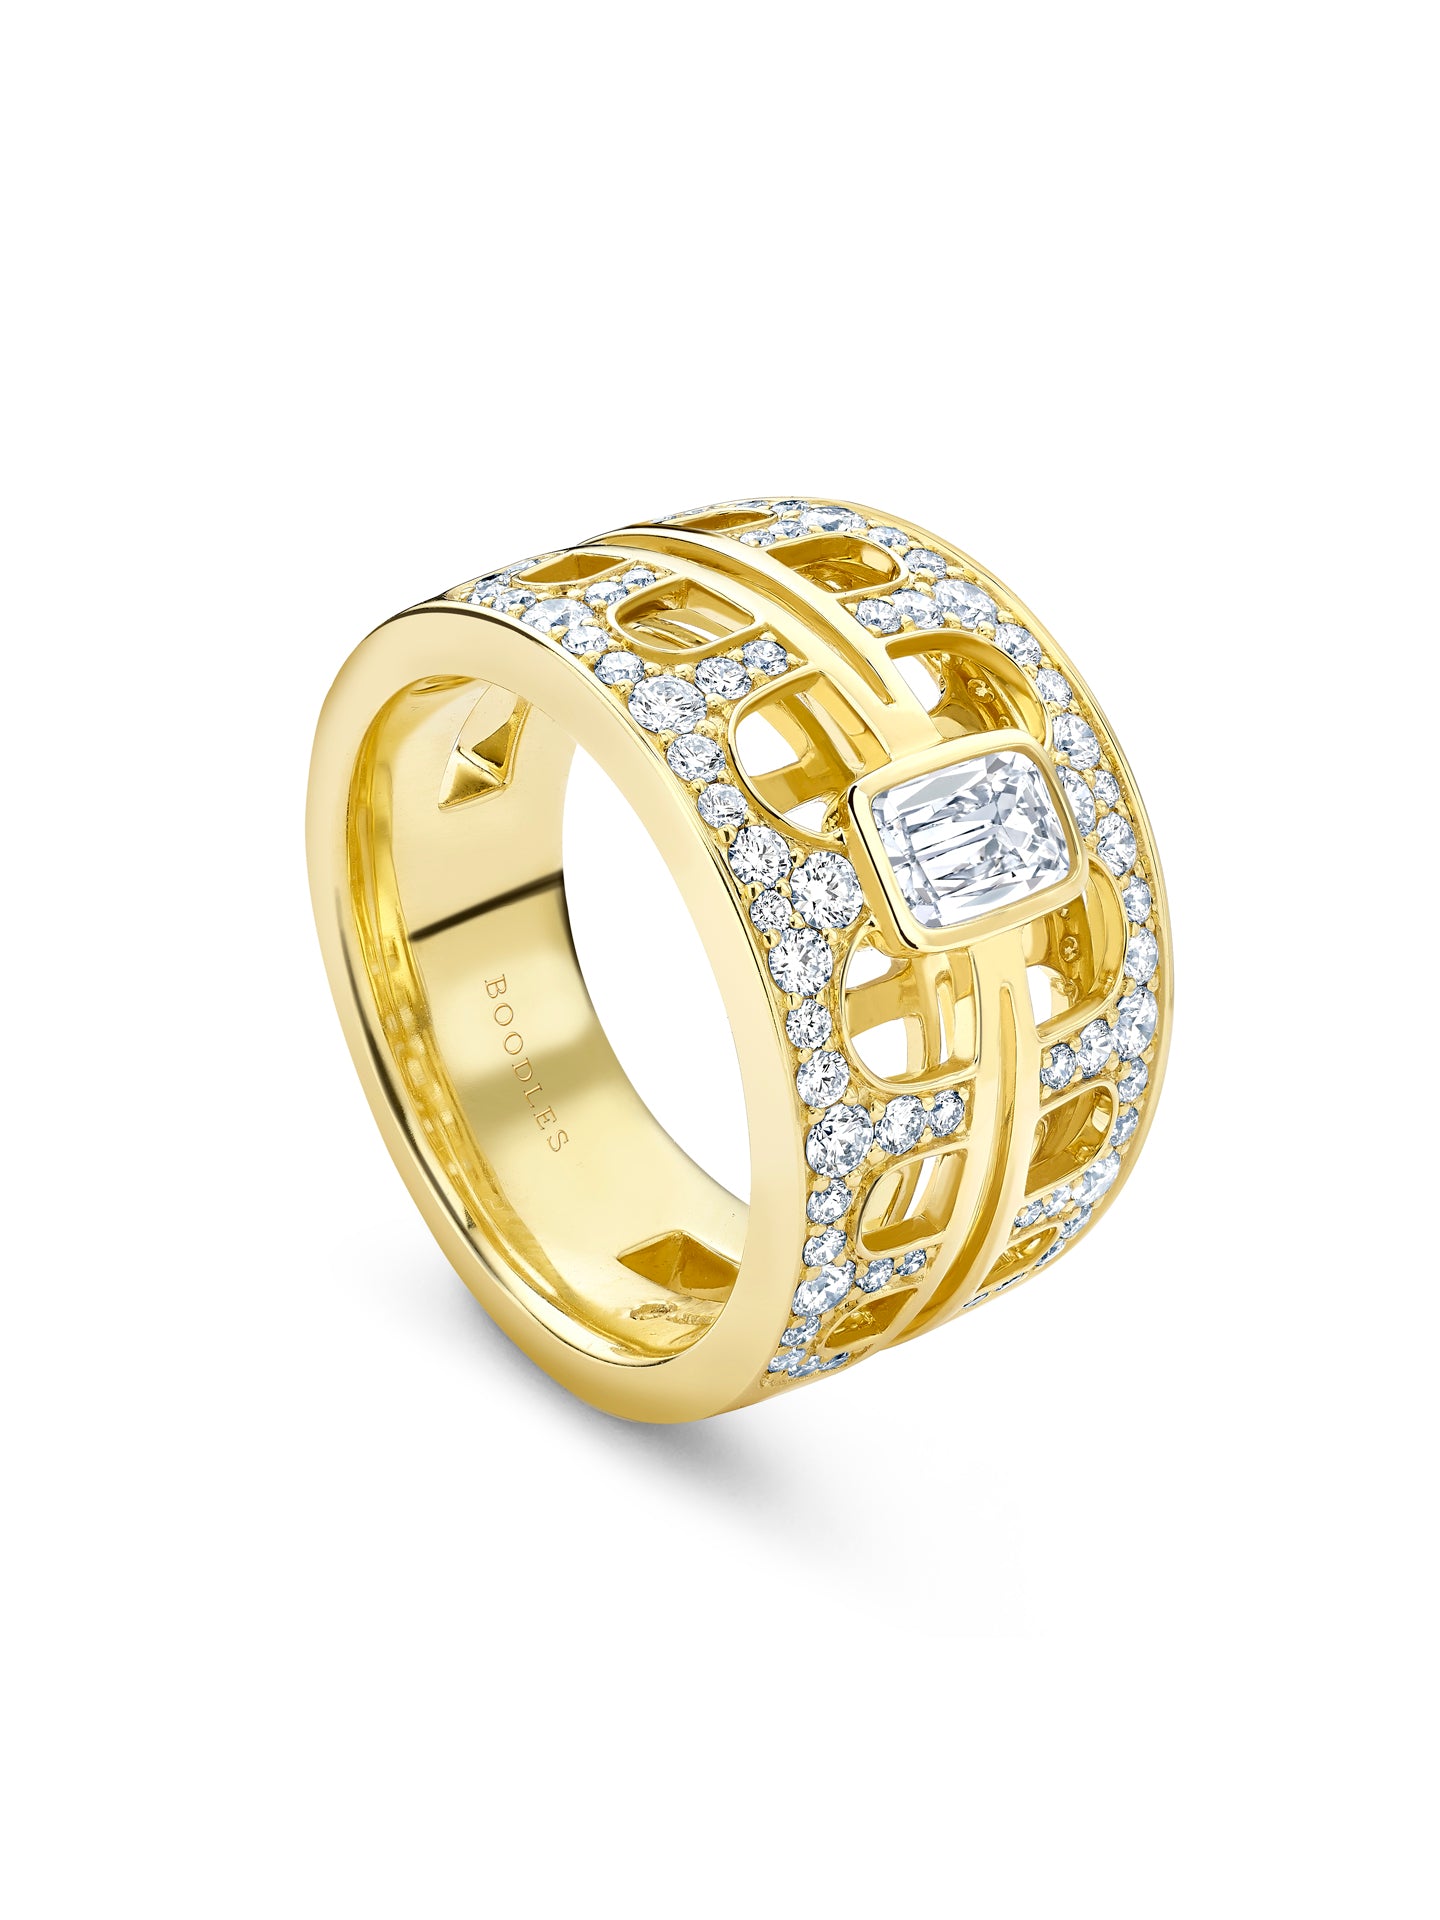 Boodles x The National Gallery Perspective Yellow Gold Ring | Boodles